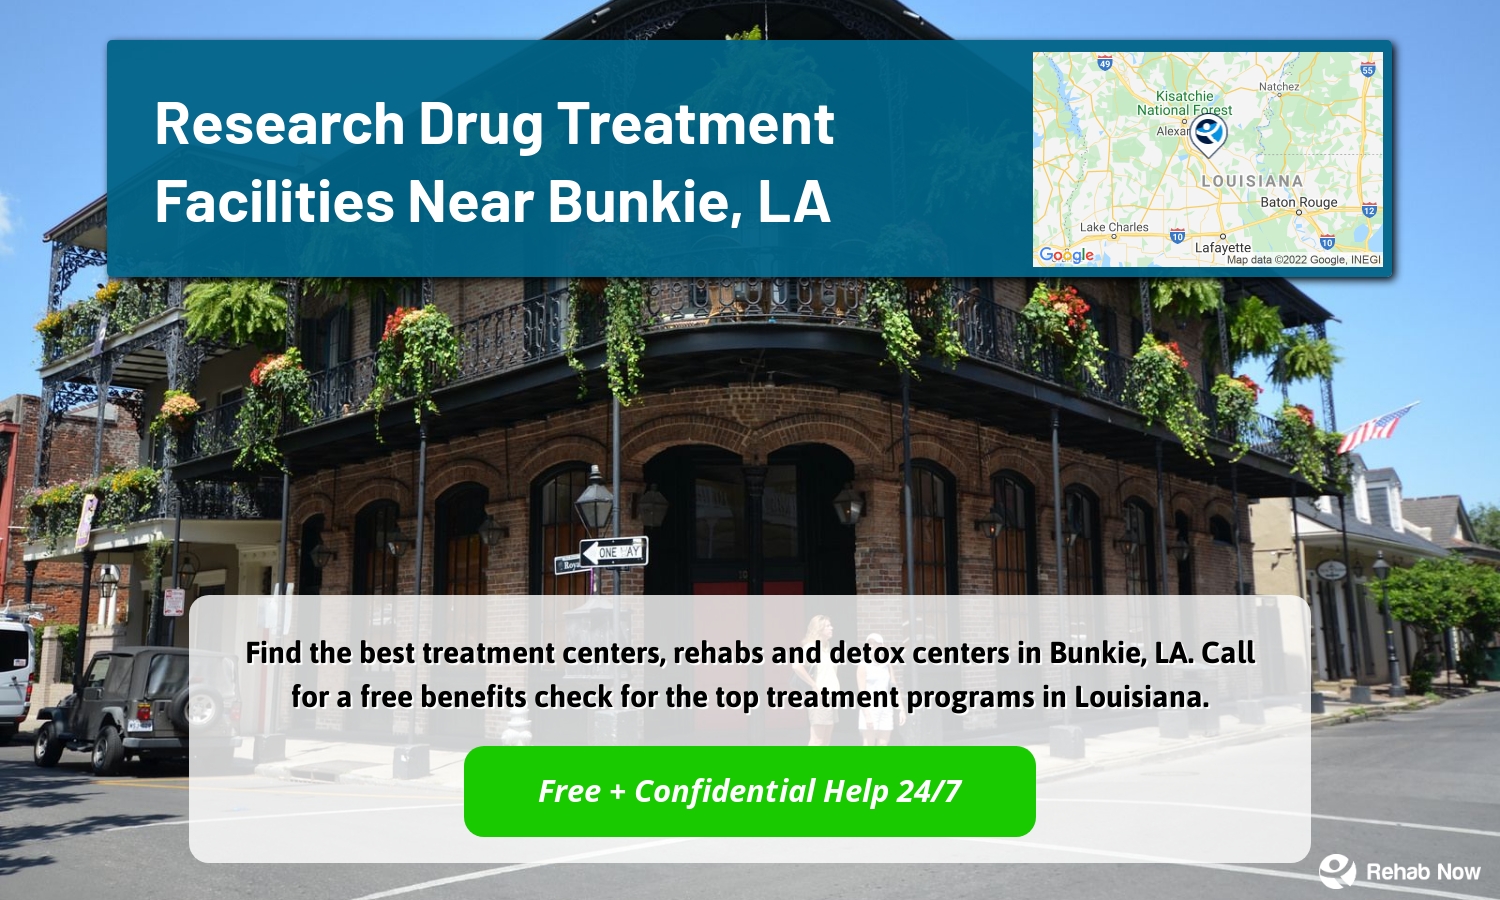 Find the best treatment centers, rehabs and detox centers in Bunkie, LA. Call for a free benefits check for the top treatment programs in Louisiana.